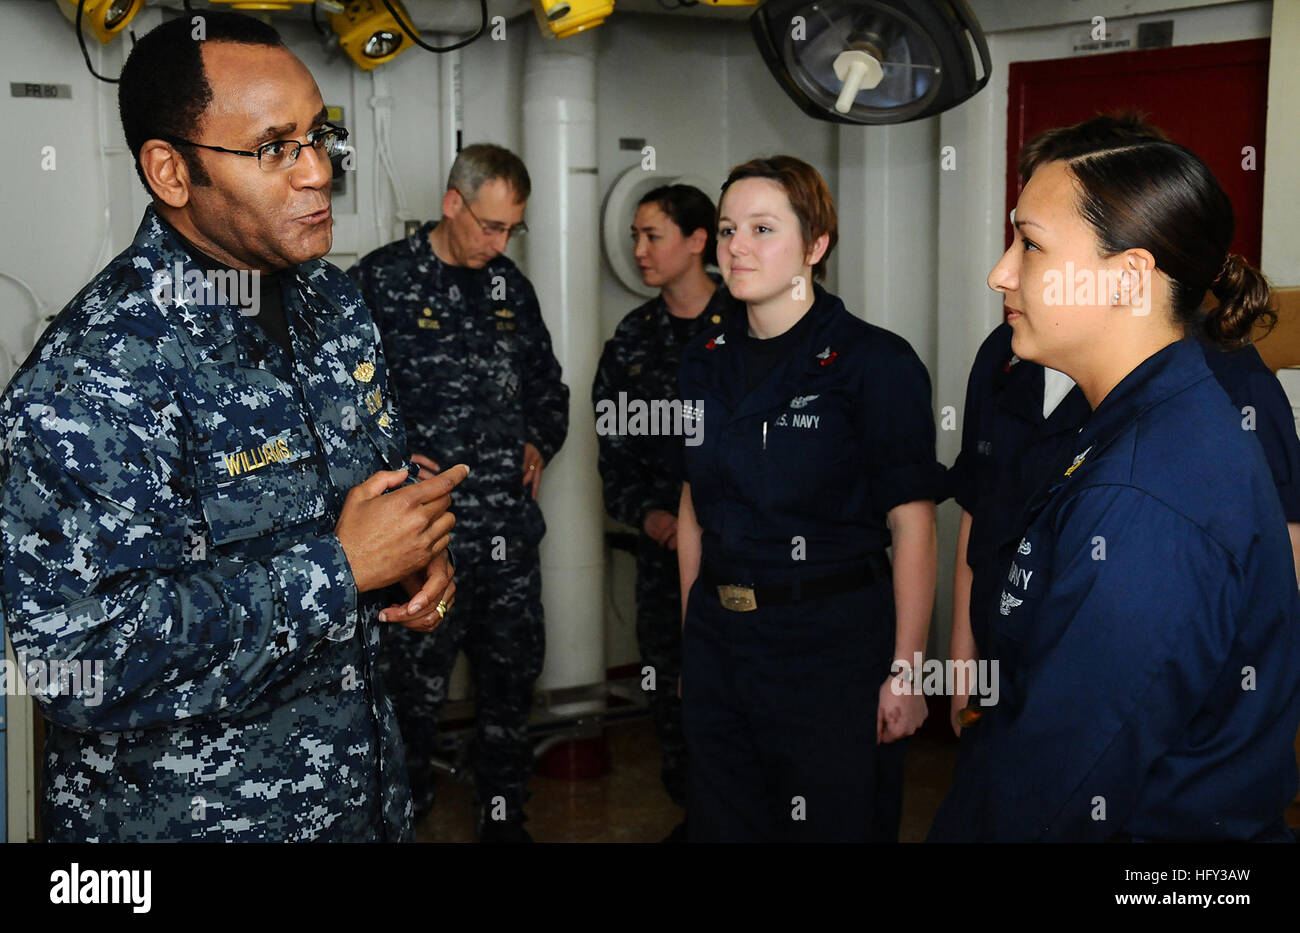 Vice Adm. Mel Williams Jr., commander of U.S. 2nd Fleet, speaks with Petty Officer 1st Class Ingrid Cortez, hospital corpsman, leading petty officer of the medical department aboard the amphibious assault ship USS Bataan. Williams toured the ship and thanked the crew for their work during Operation Unified Response. (U.S. Navy photo by Petty Officer 2nd Class Julio Rivera) USS Bataan DVIDS258130 Stock Photo